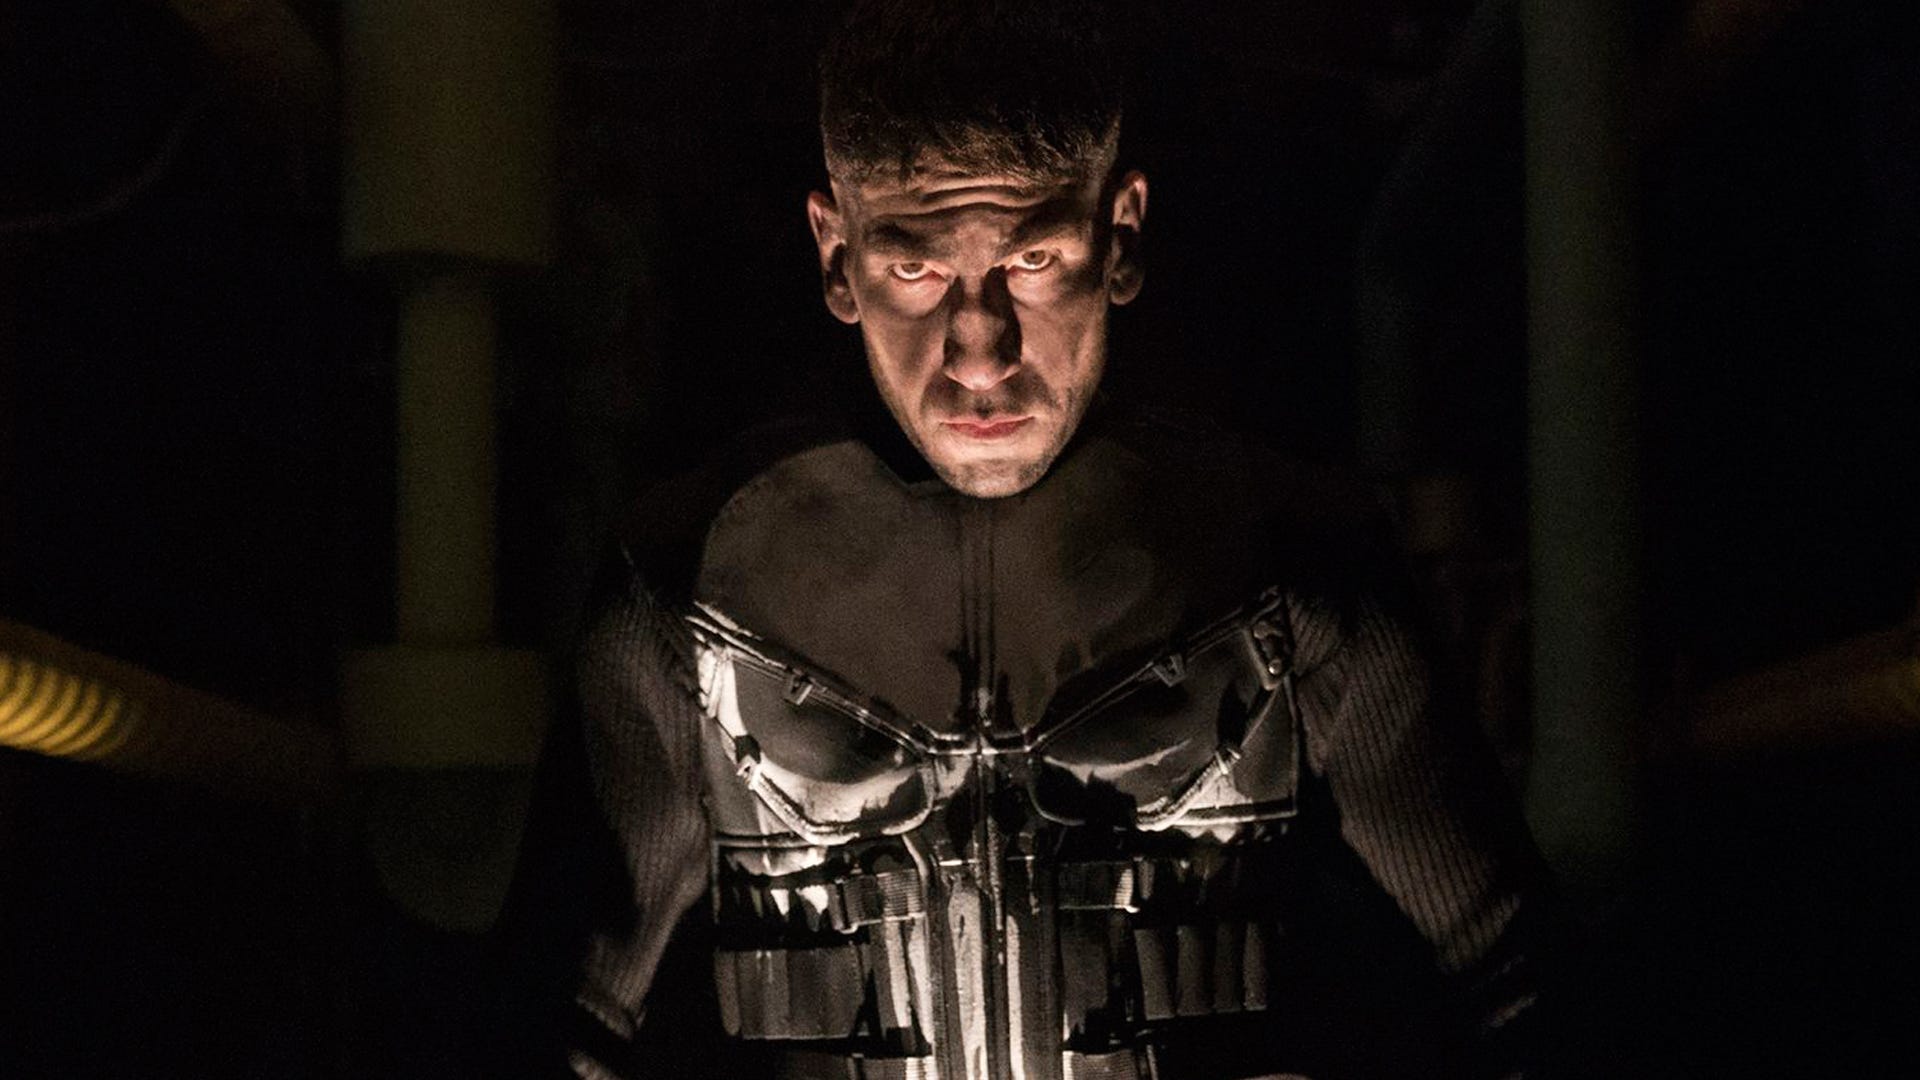 A set photo for Disney’s Daredevil basically confirms Jon Bernthal is back as The Punisher, even if no one will admit it